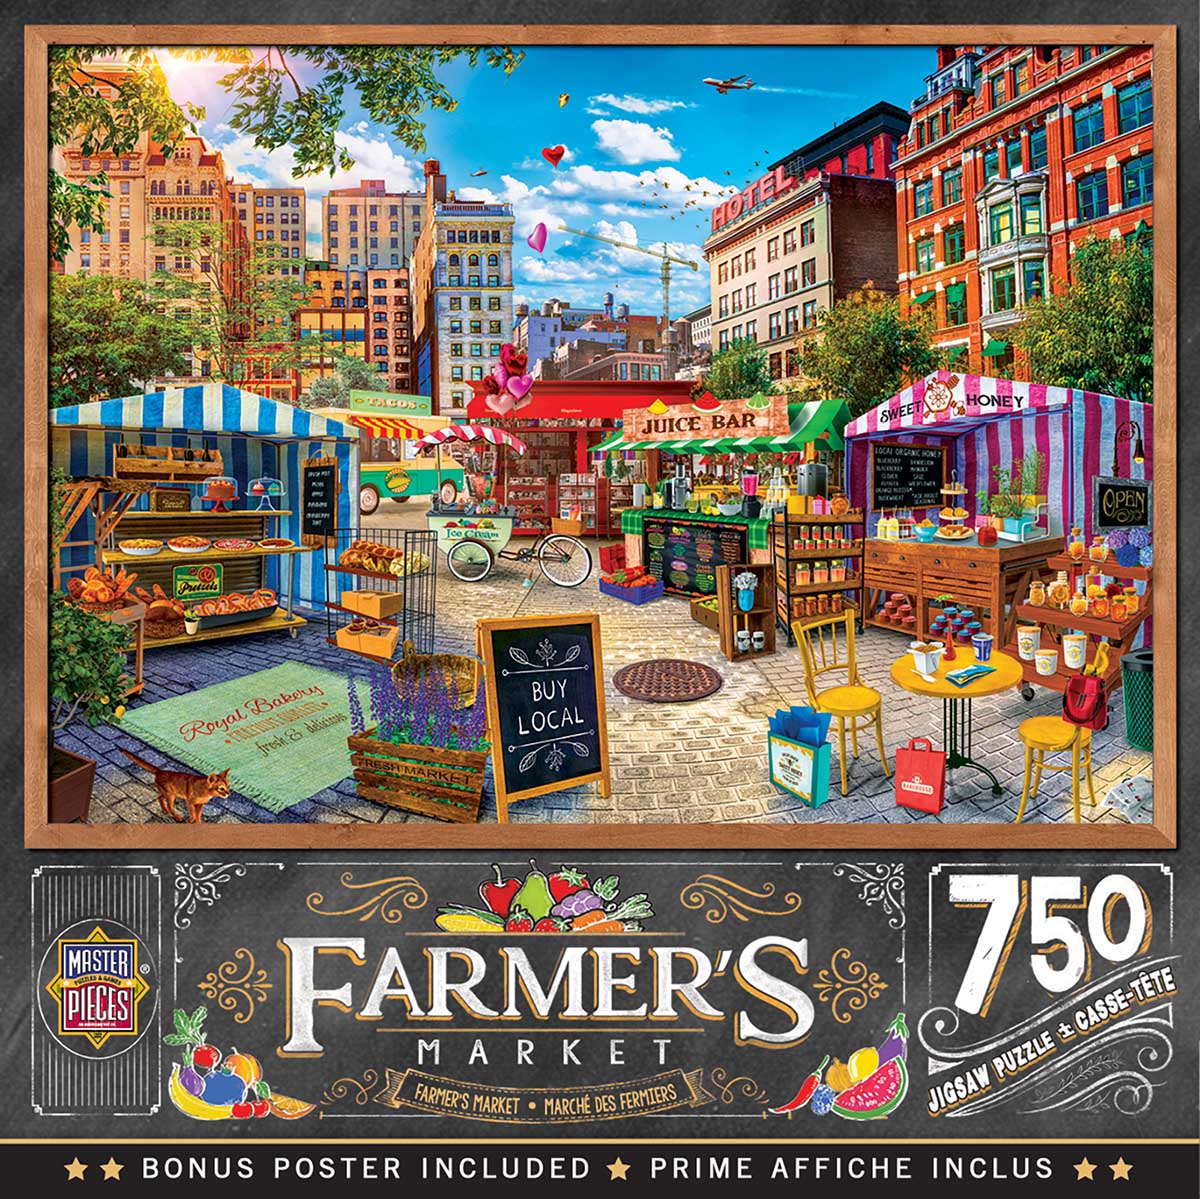 Leanin' Tree/Masterpieces Puzzle - #32017 Farmers Market: Buy Local Honey - 750pc Jigsaw Puzzle